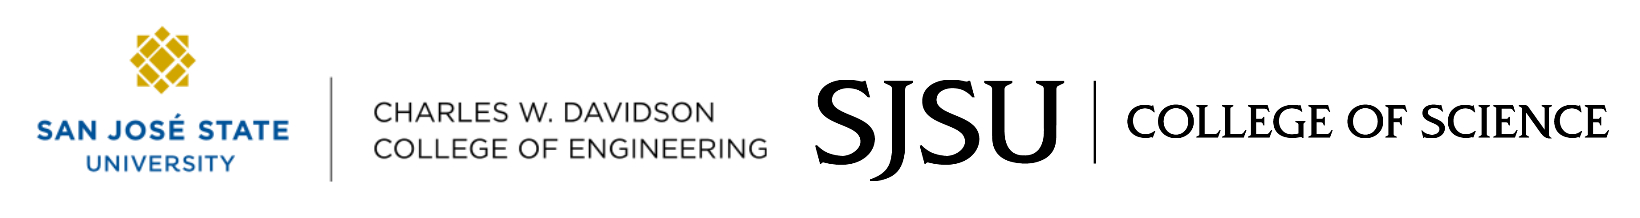 On the left displays the SJSU Charles W. Davidson College of Engineering Logo. On the right displays SJSU Department of Computer Science Logo.